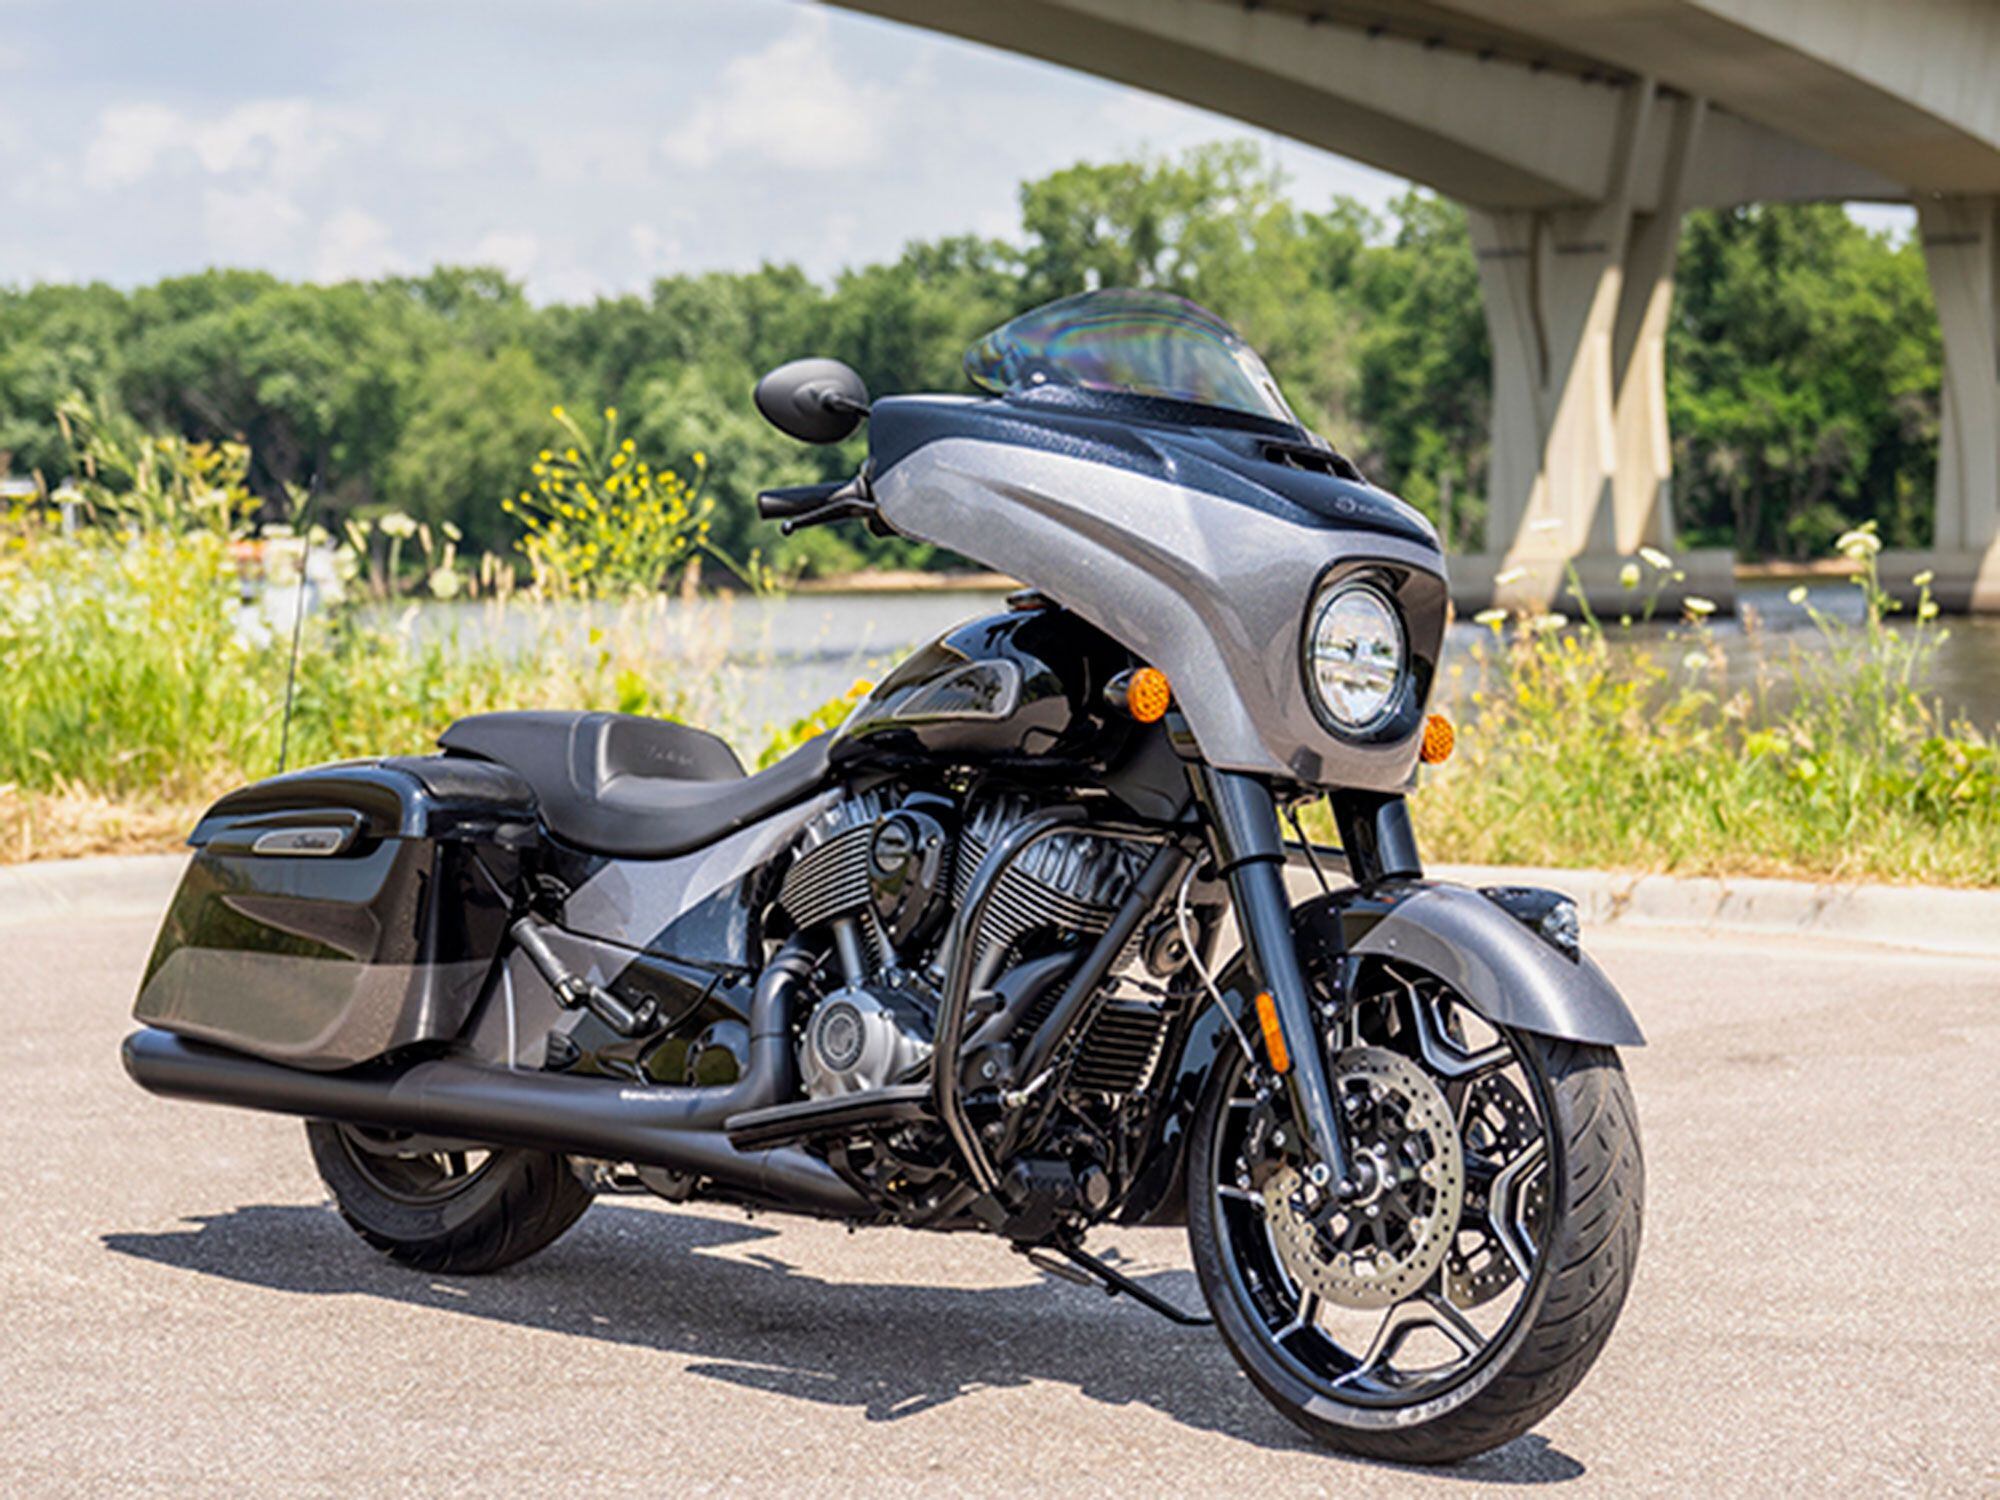 The 2021 Chieftain Elite is Indian Motorcycle’s exclusive, powerful 120th birthday present to itself. Only 120 lucky buyers will have the opportunity to own one worldwide.